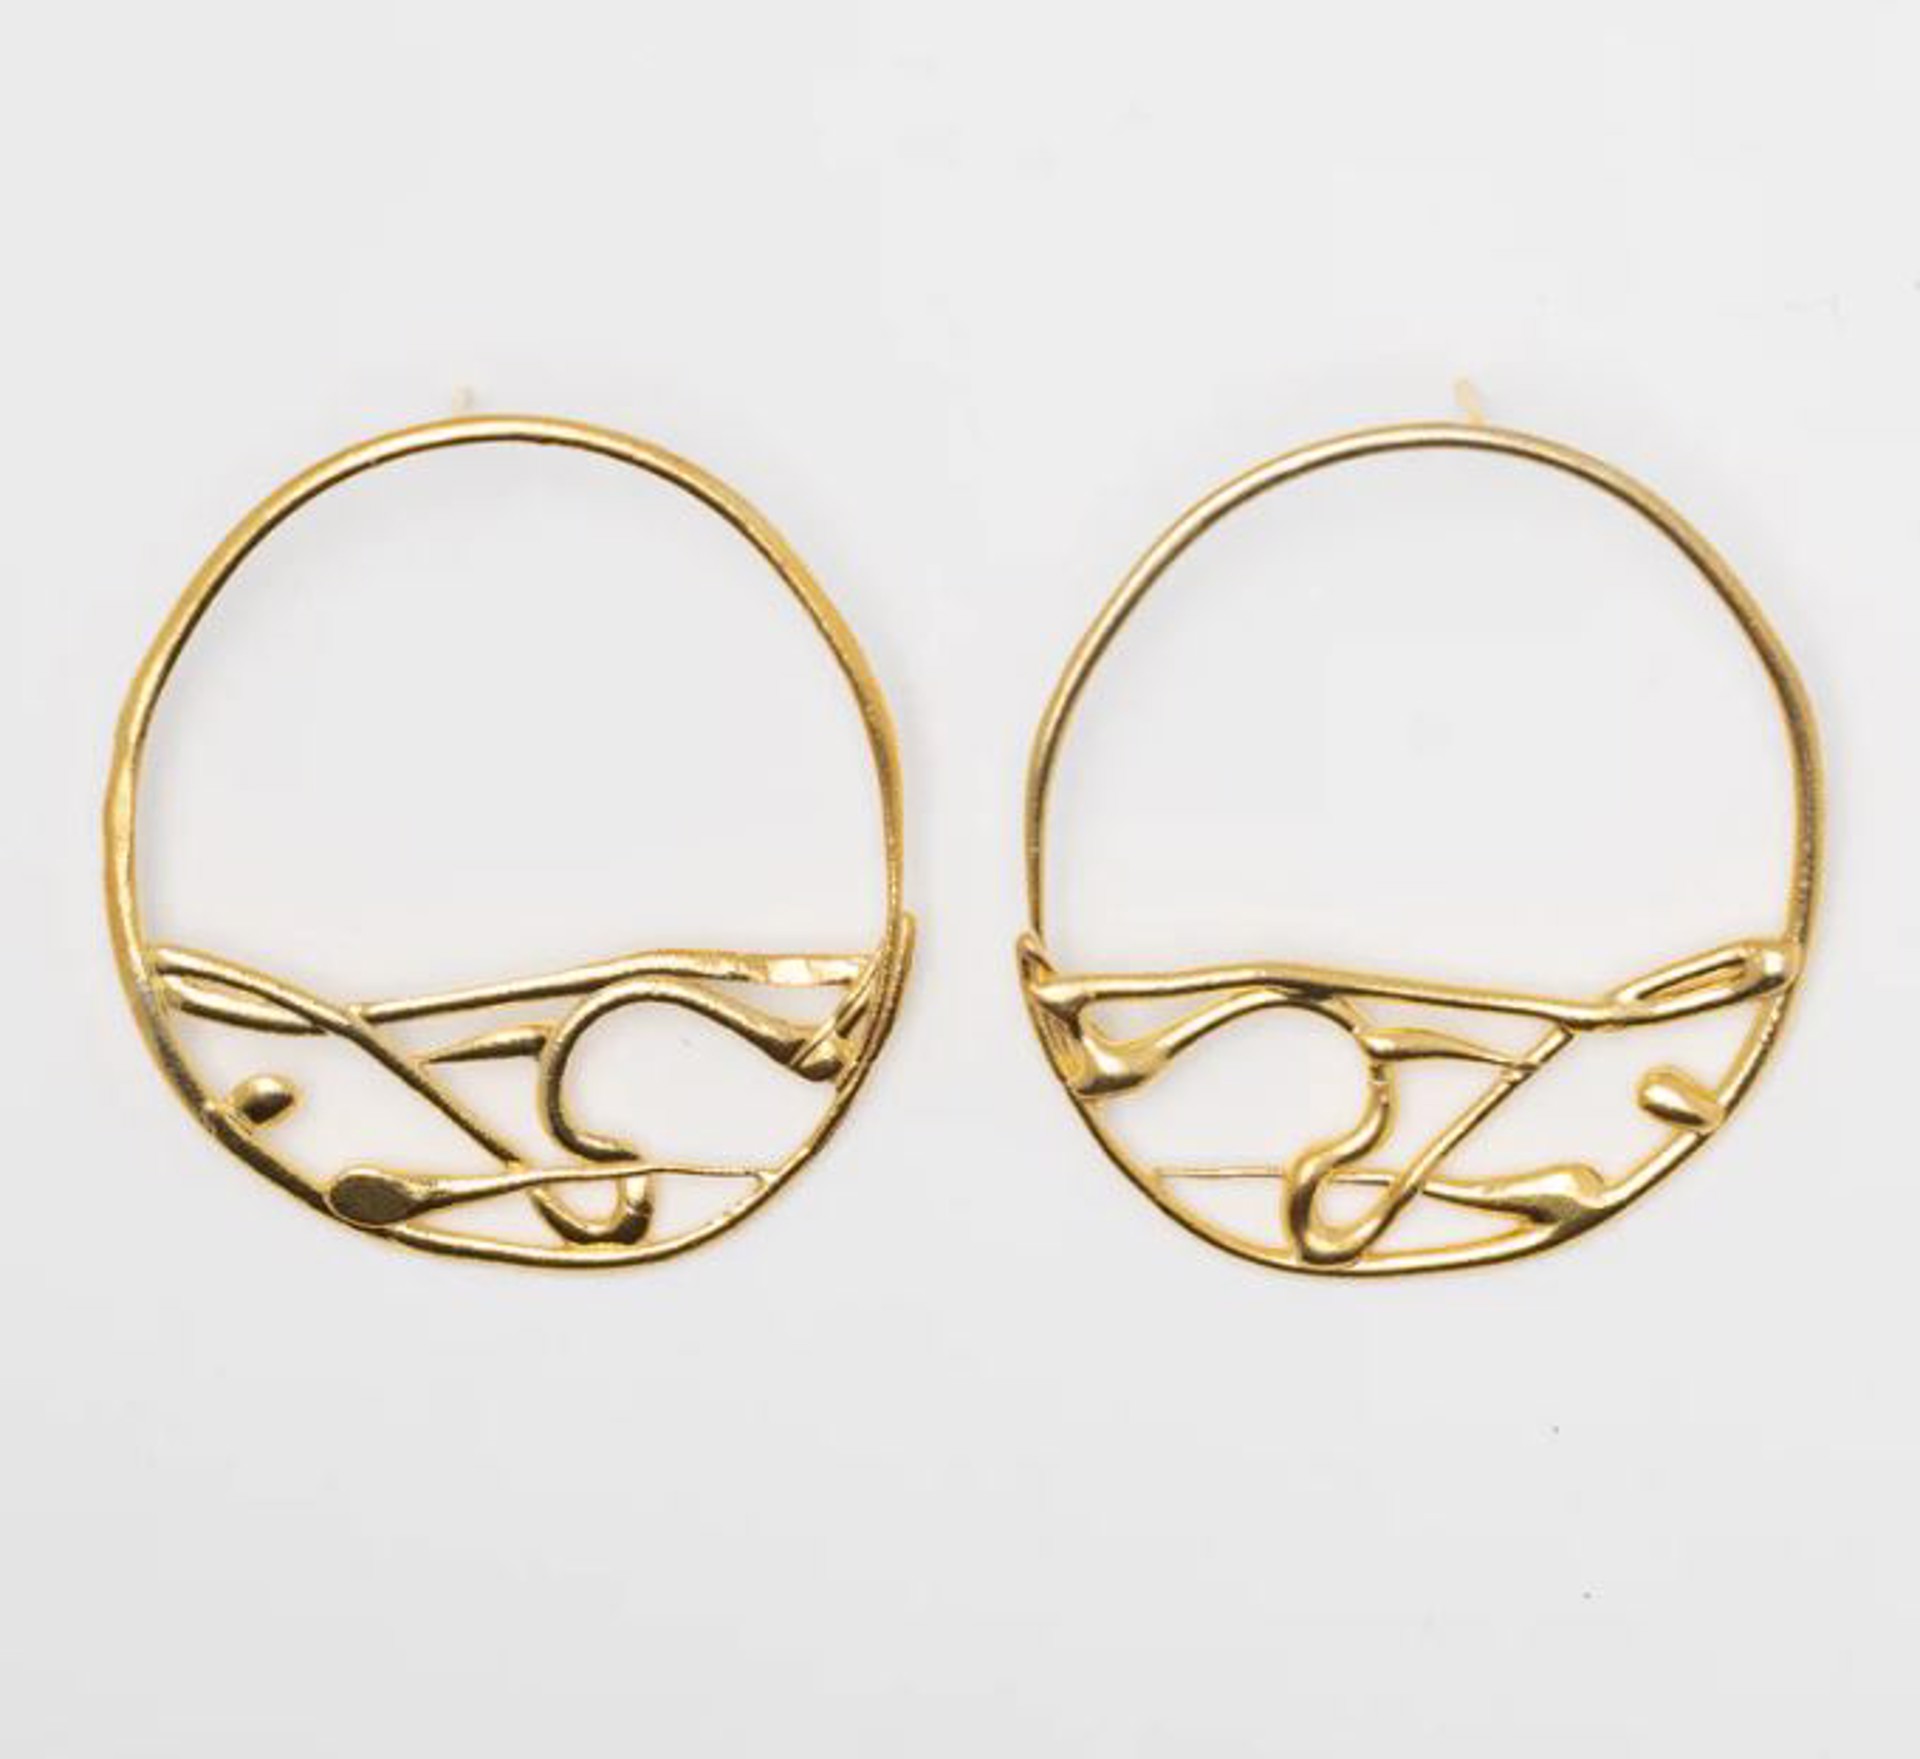 Hydro Hoop Earrings - Gold Plated by Sydnie Wainland